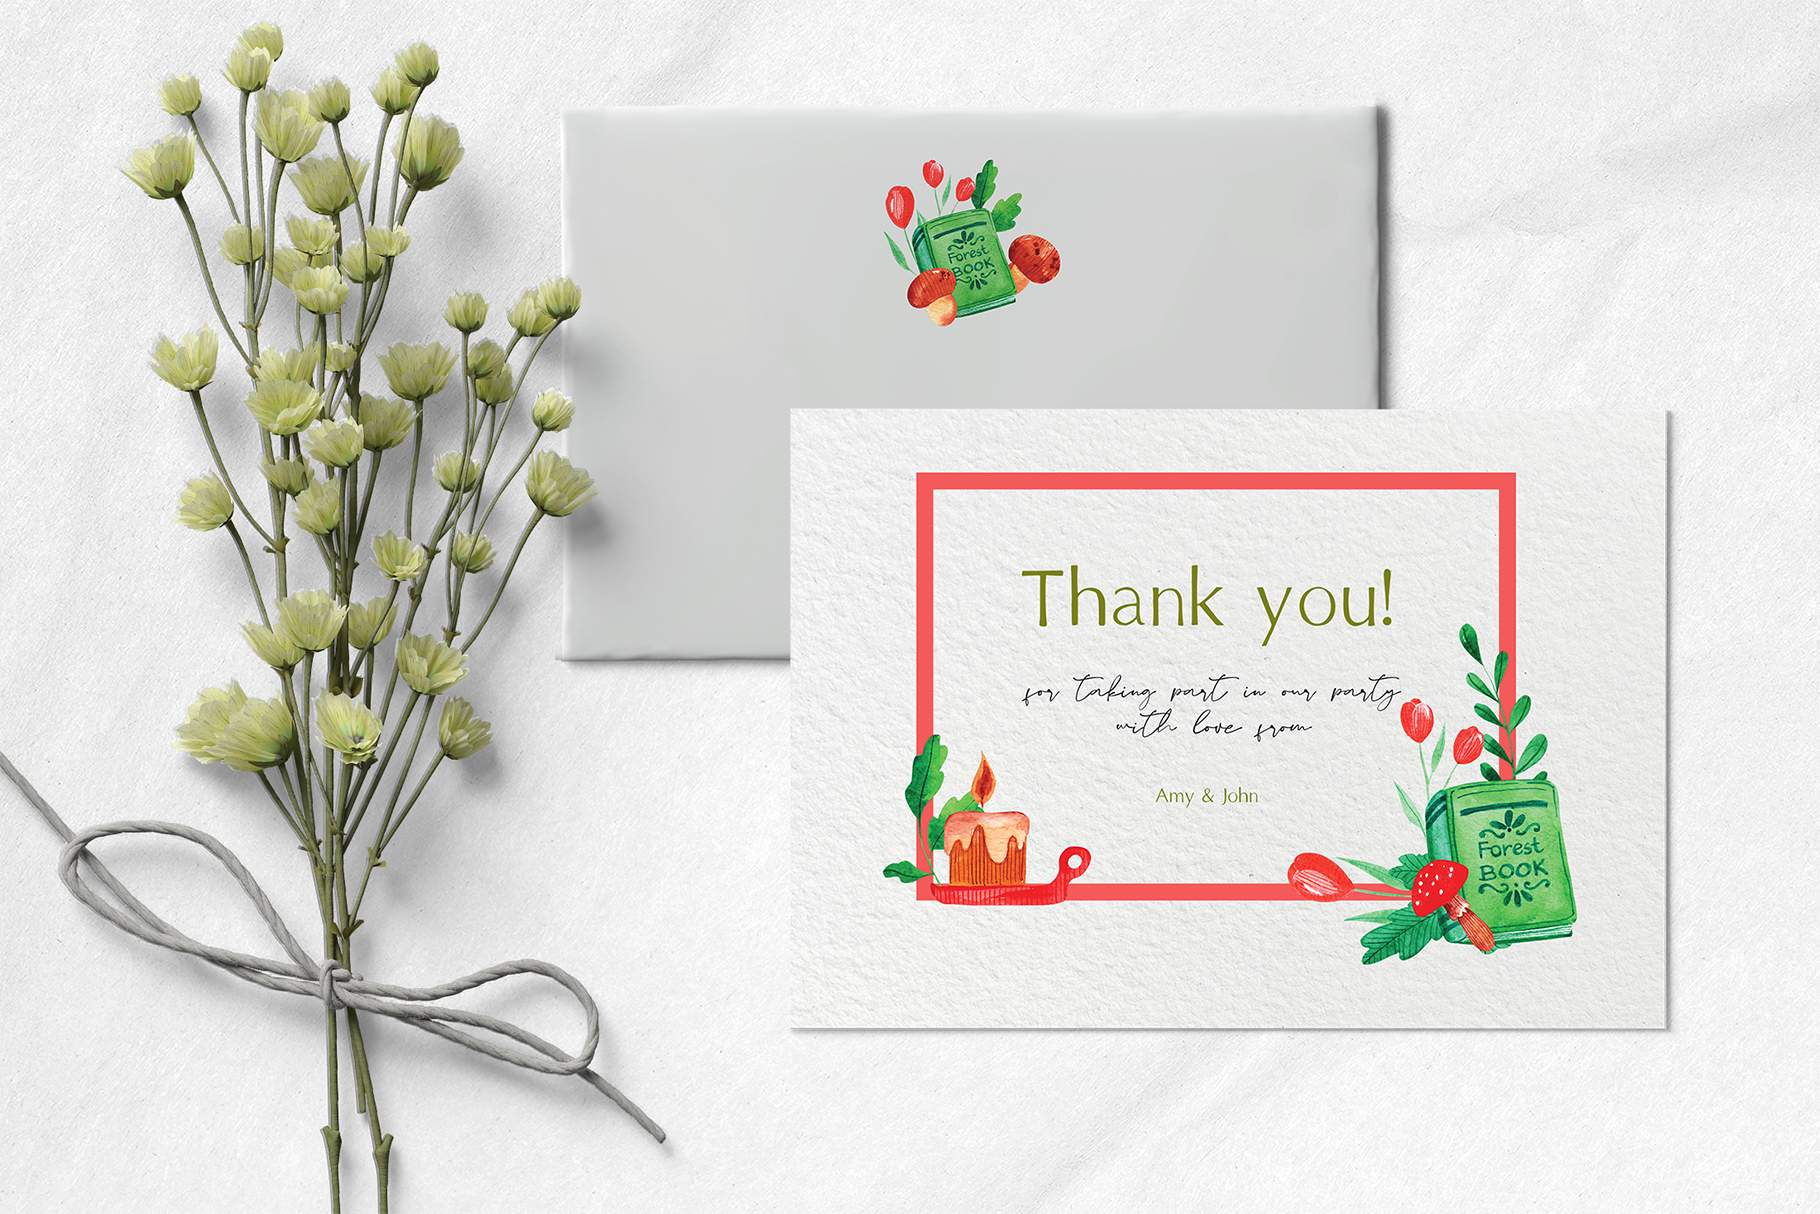 Thank card with a bouquet of flowers next to it.